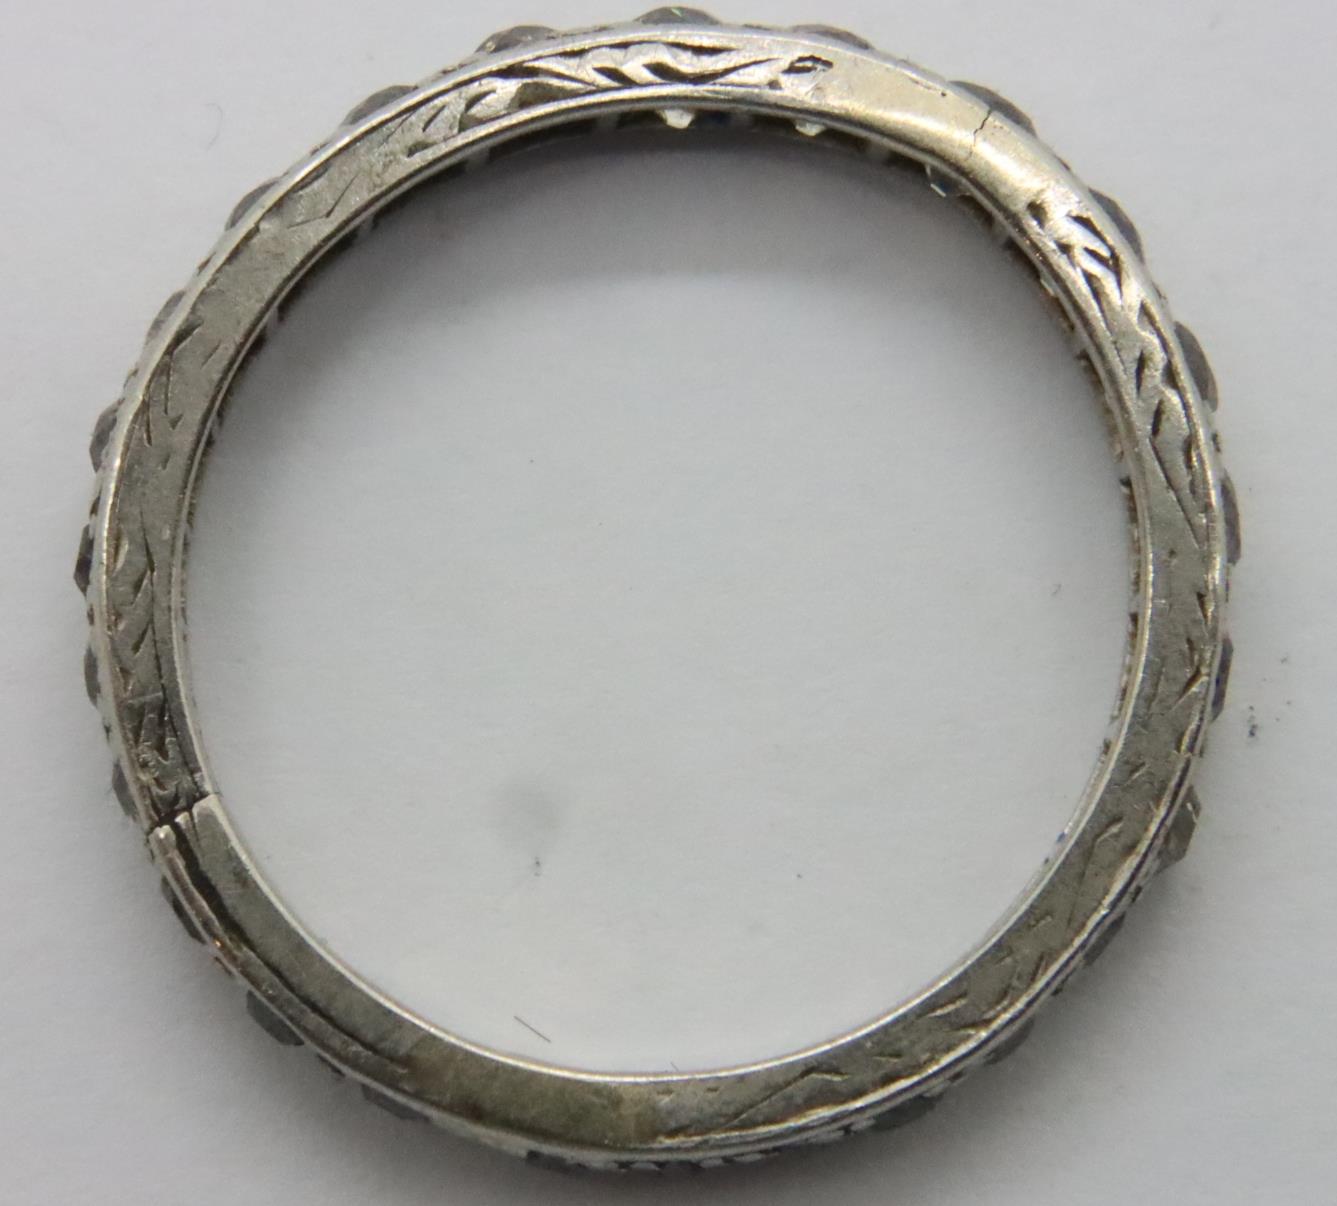 Presumed 18ct white gold diamond and sapphire eternity ring, size Q. P&P Group 1 (£14+VAT for the - Image 2 of 3